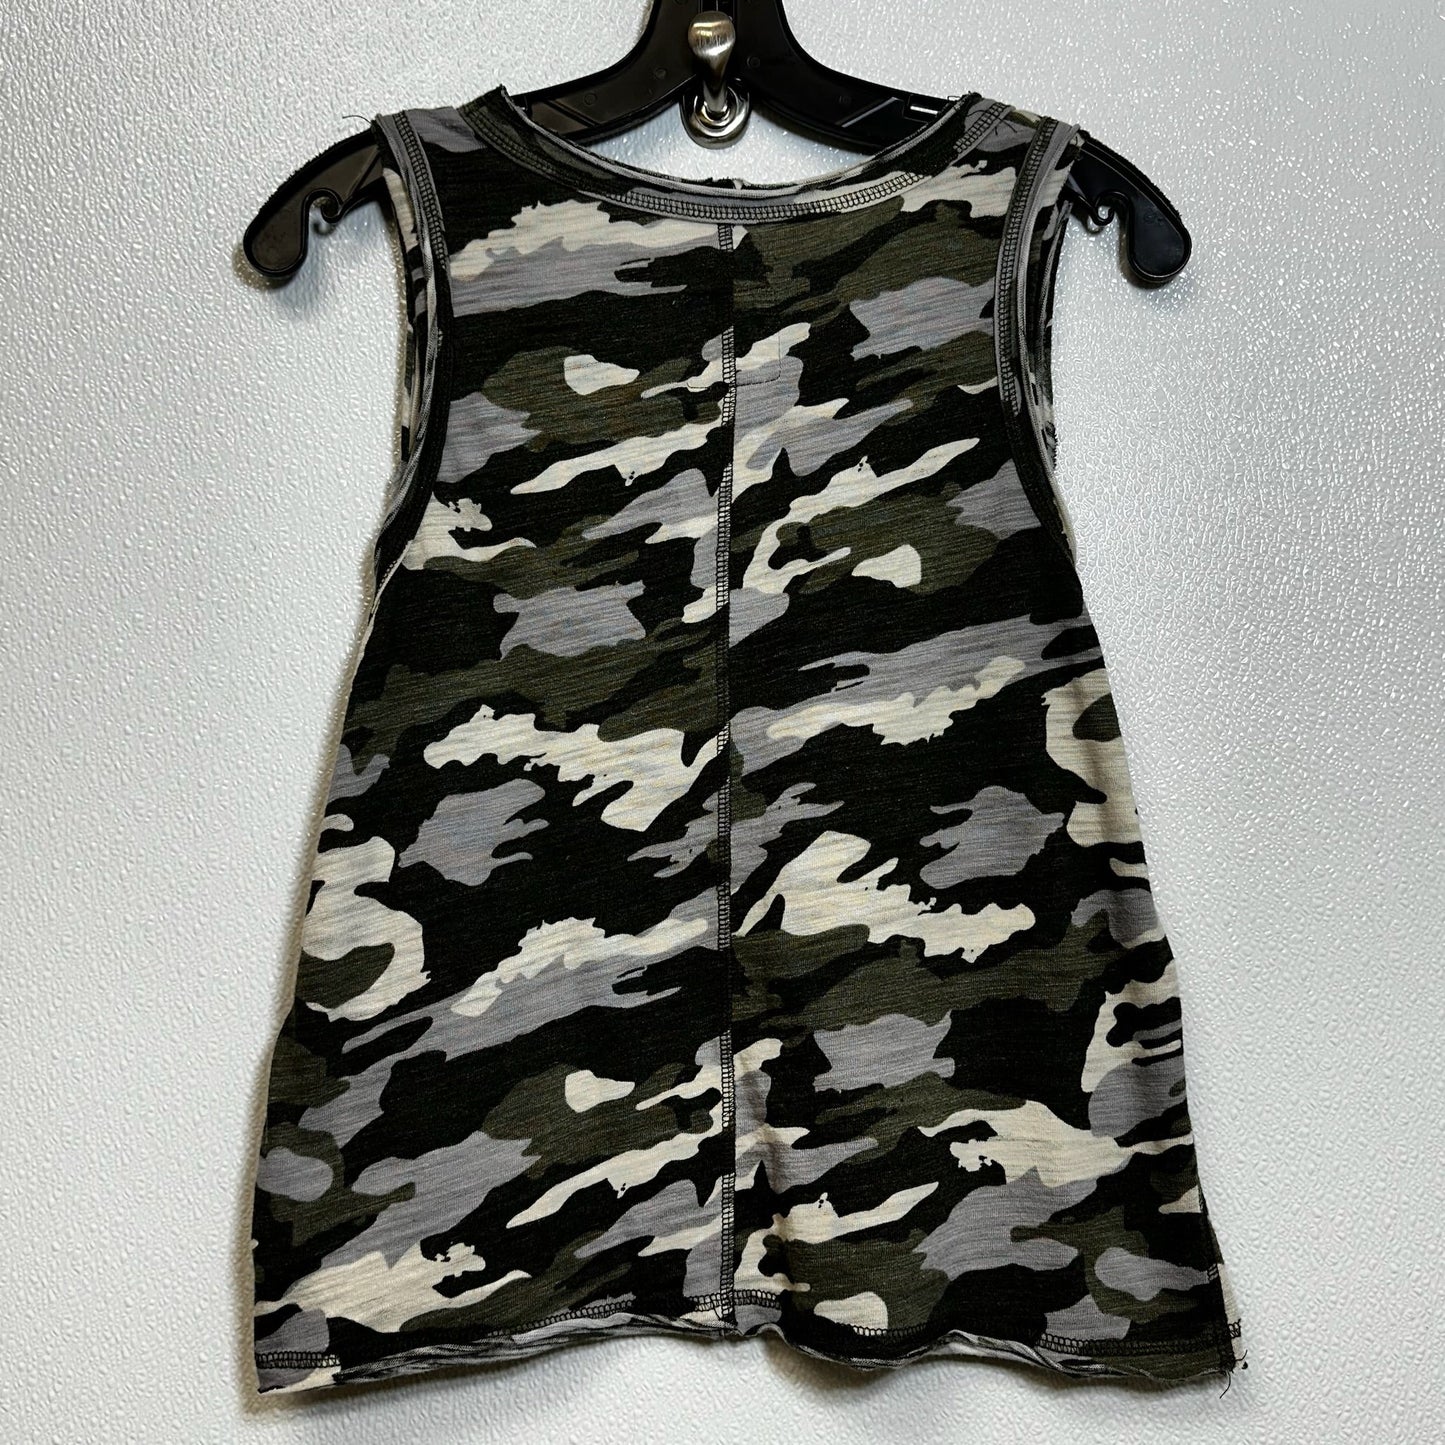 Camoflauge Tank Top Chaser, Size M